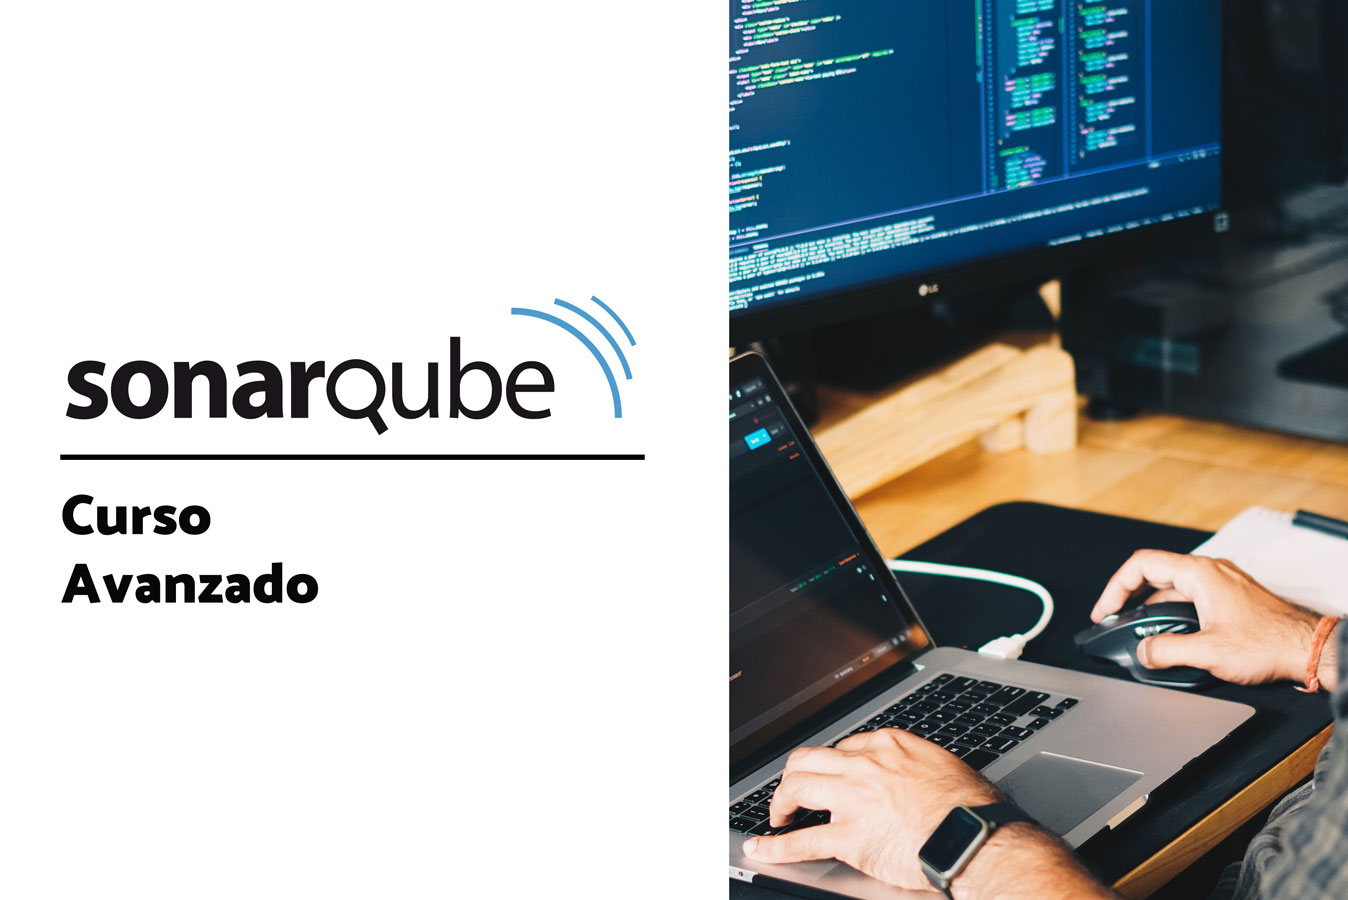 SonarQube Advanced Courses in Spanish for companies and professionals